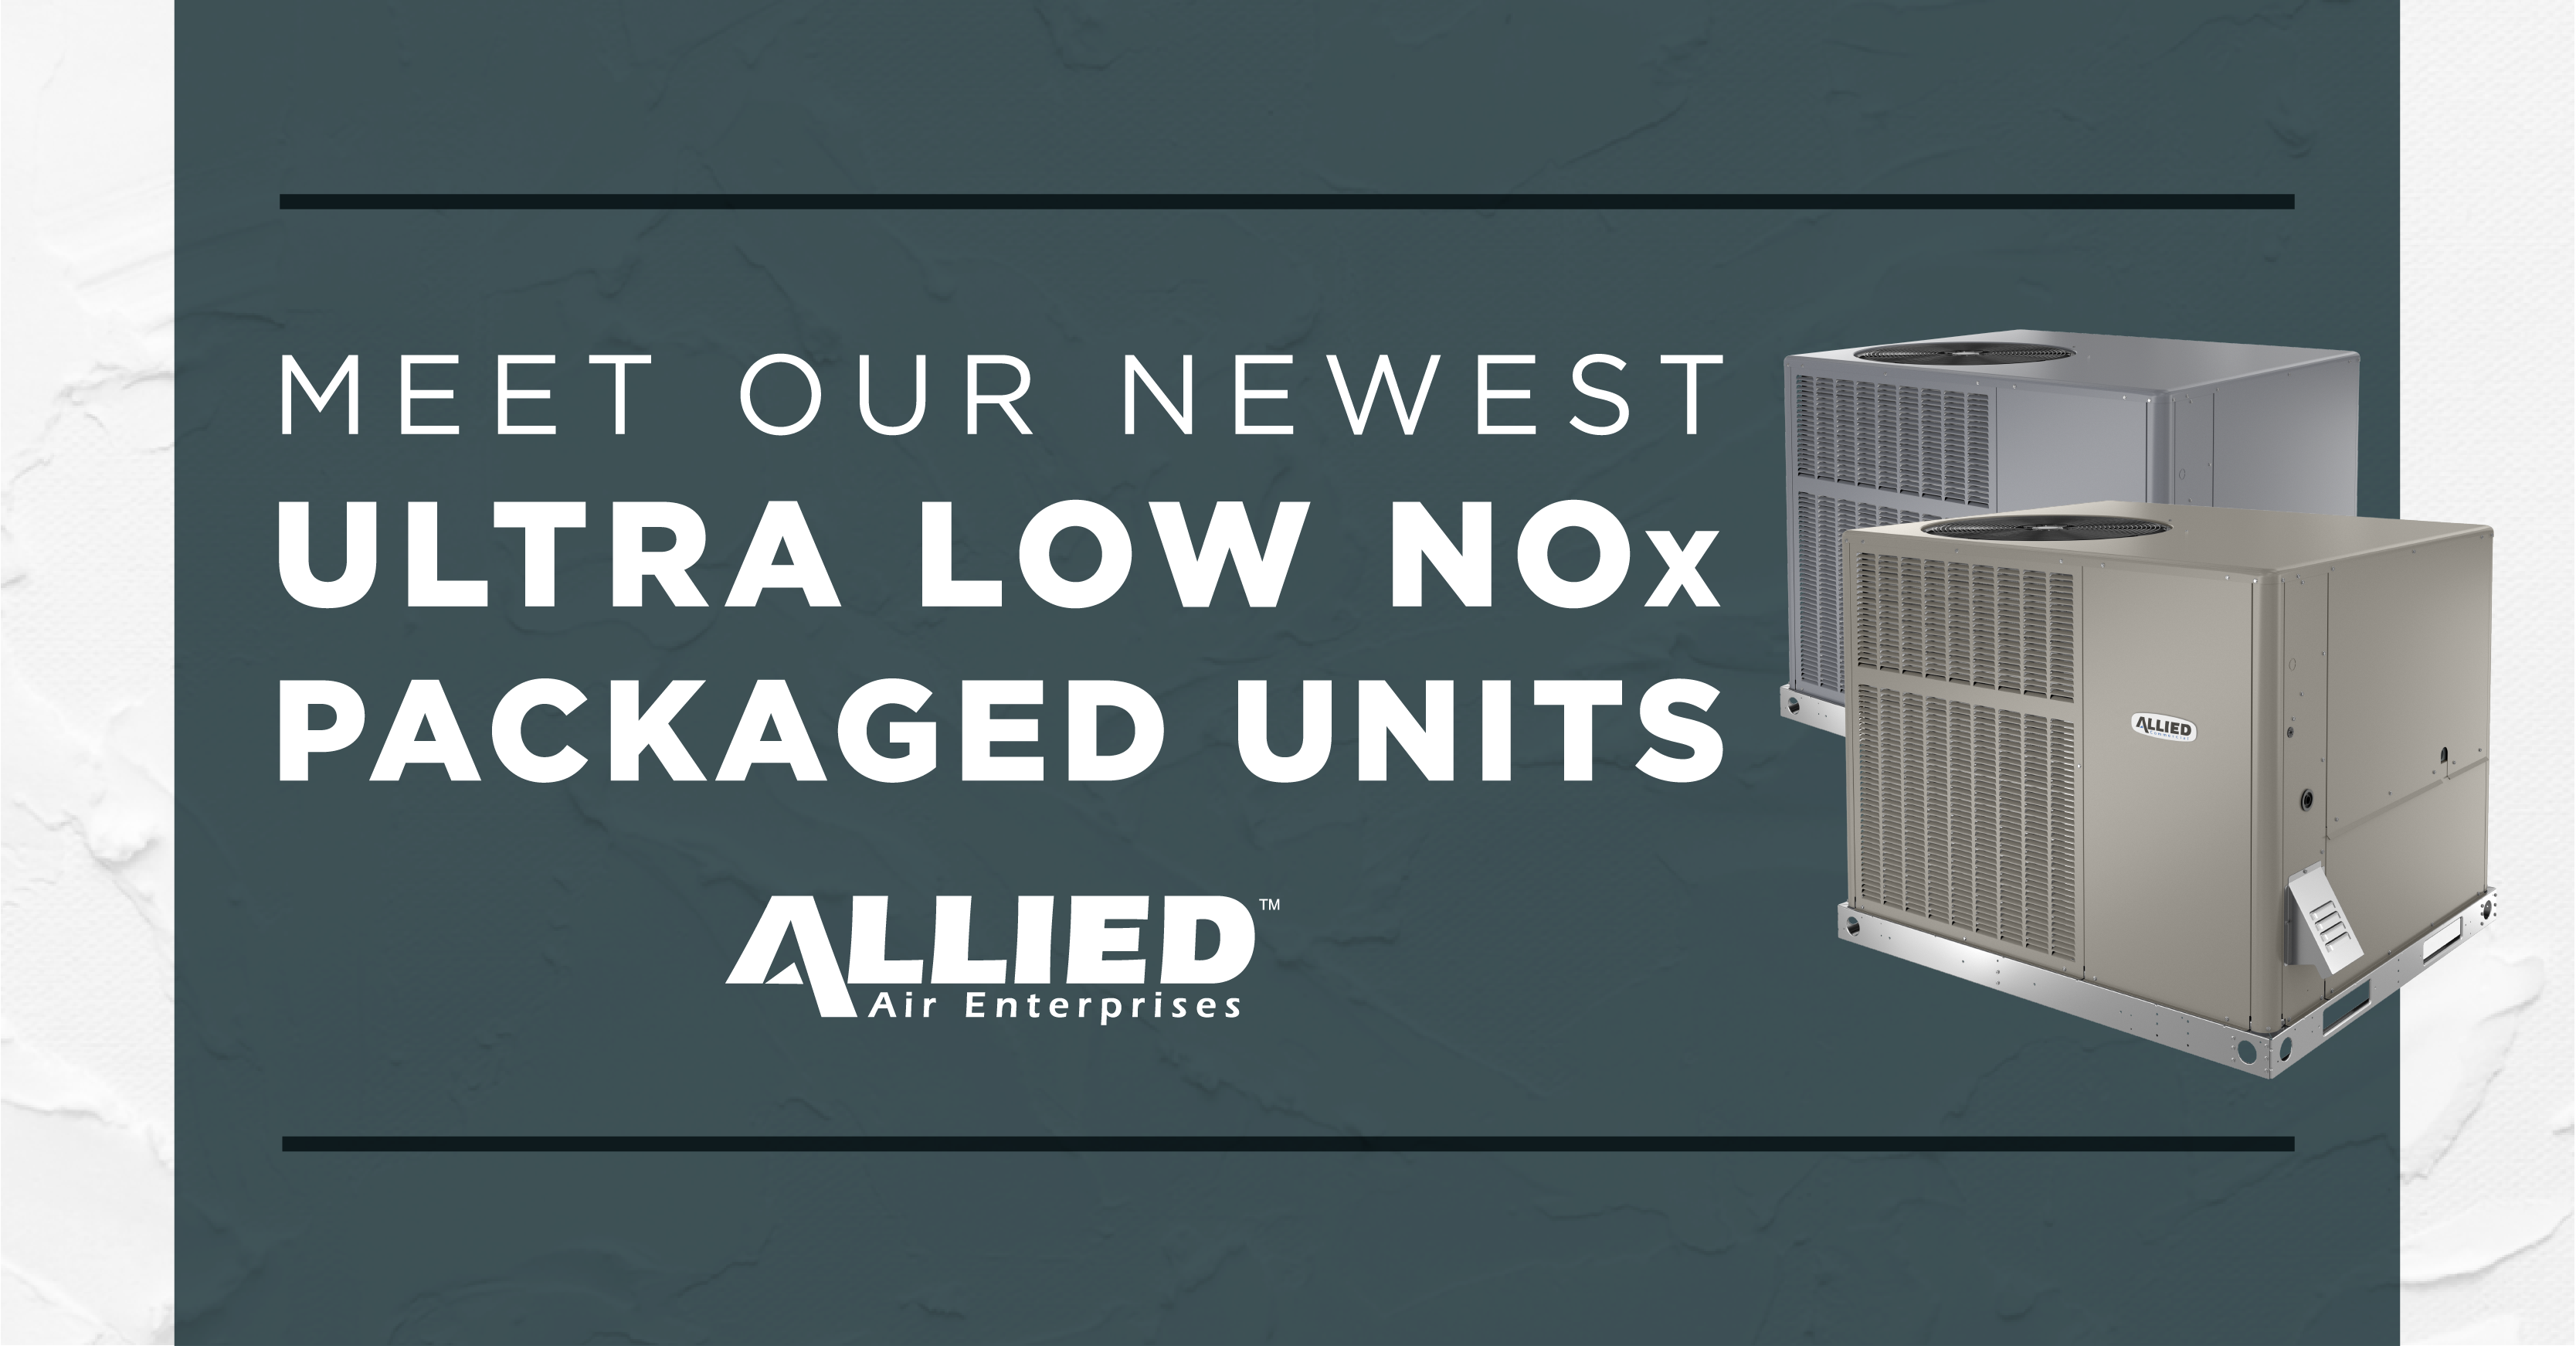  Allied Air Enterprises Announces New Residential Ultra Low NOx Weatherized Furnace to Meet NOx Emissions Regulations in California 